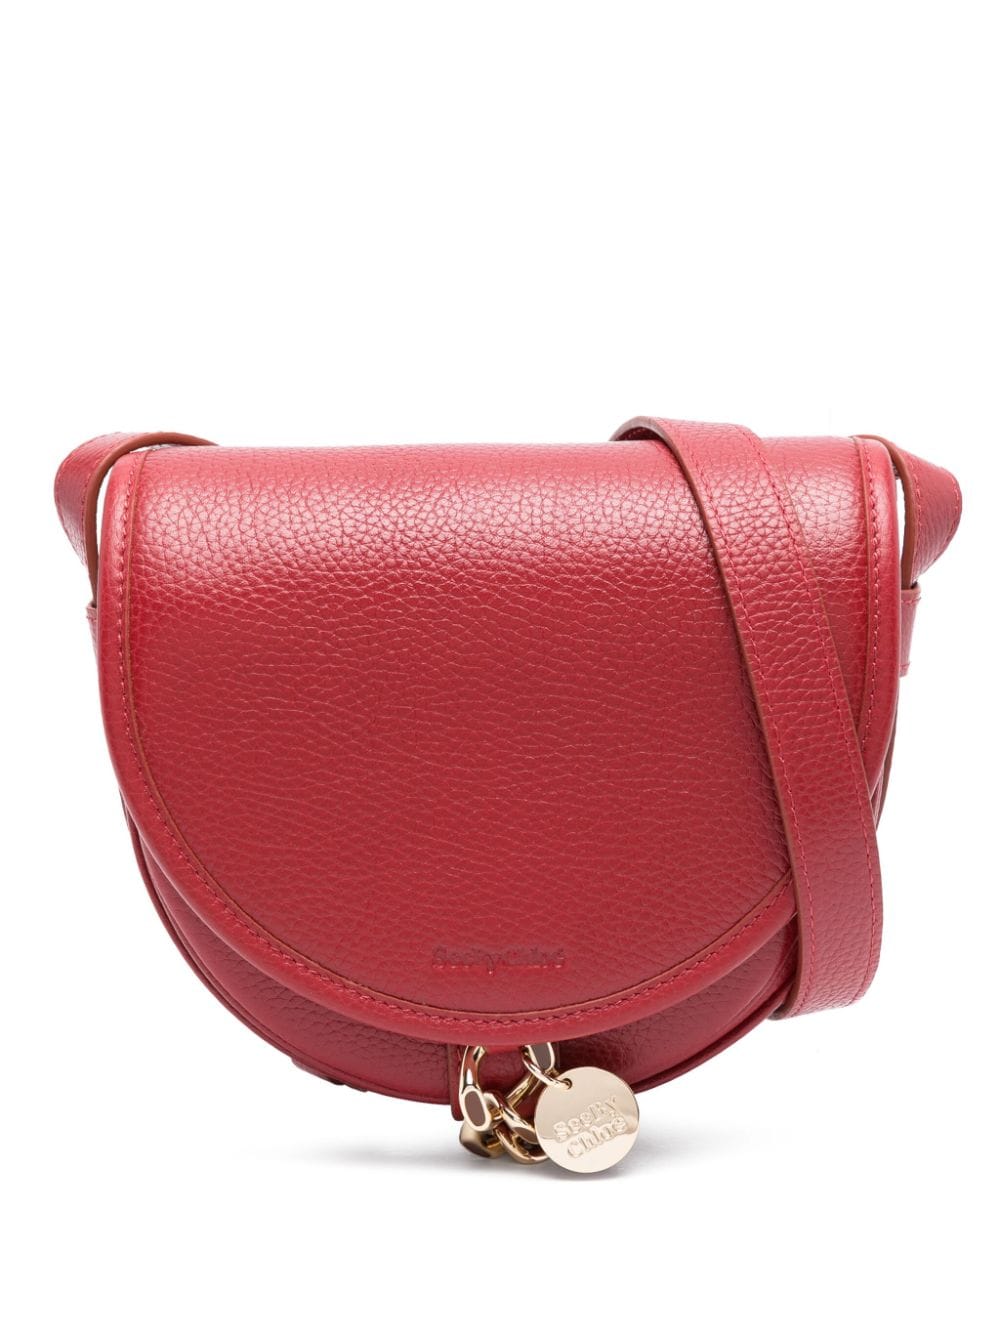 Image 1 of See by Chloé small Mara Saddle leather crossbody bag